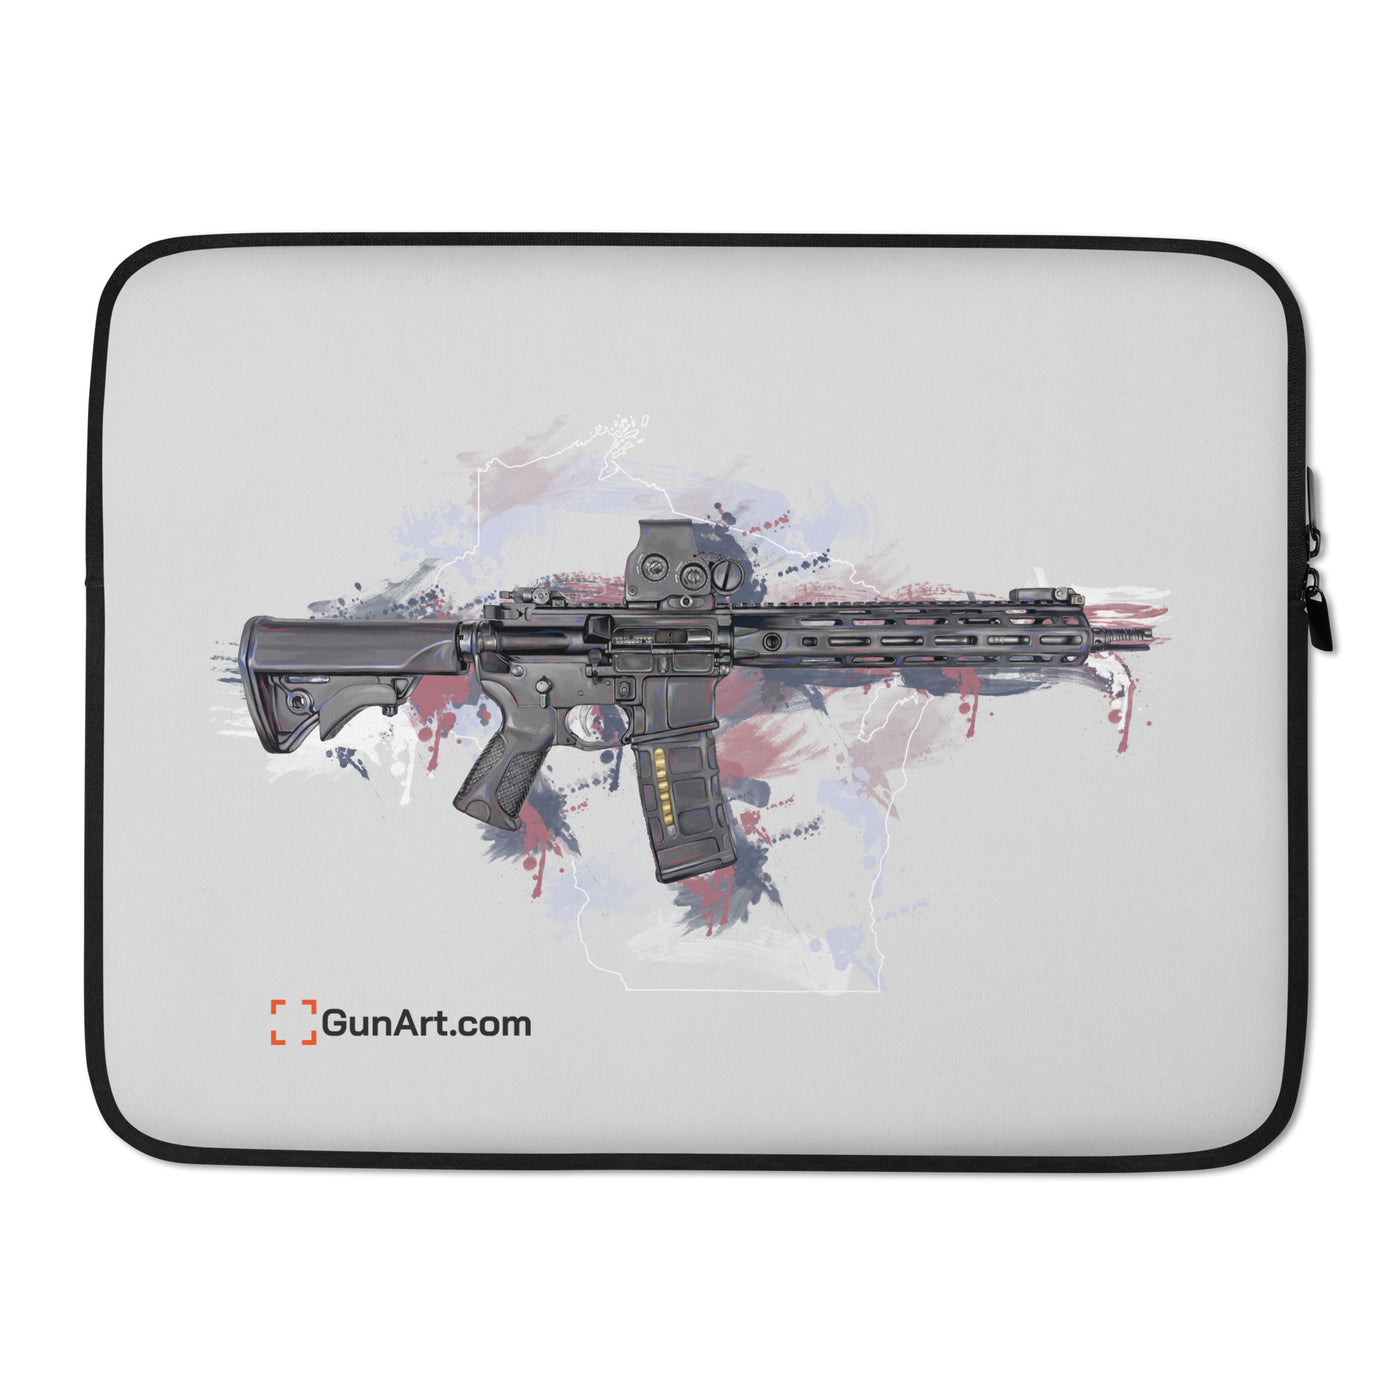 Defending Freedom - Wisconsin - AR-15 State Laptop Sleeve - White State